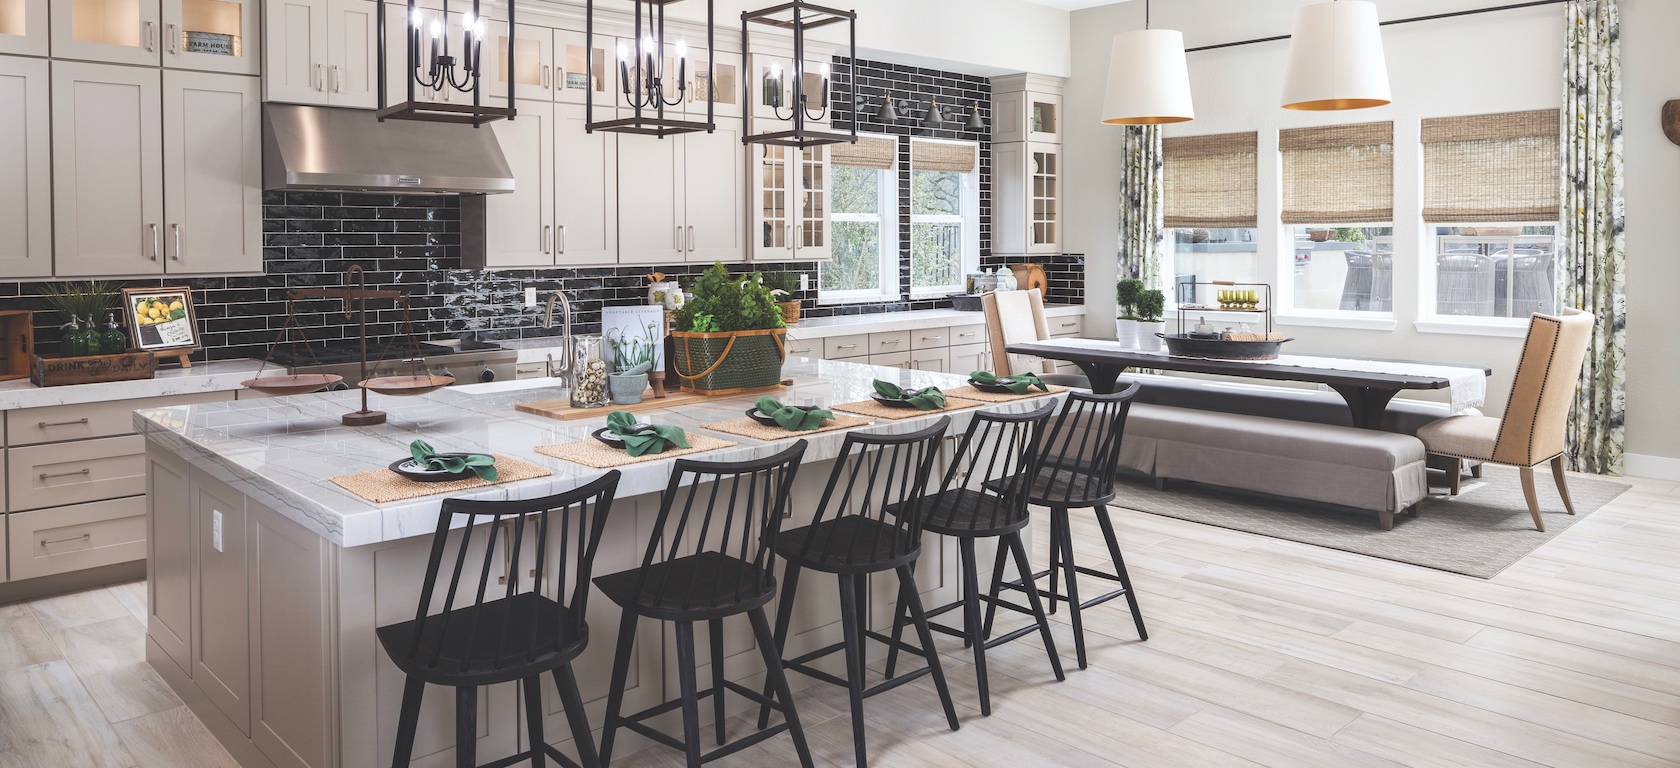 18 Breakfast Nook Ideas to Complete Your Kitchen   Build Beautiful